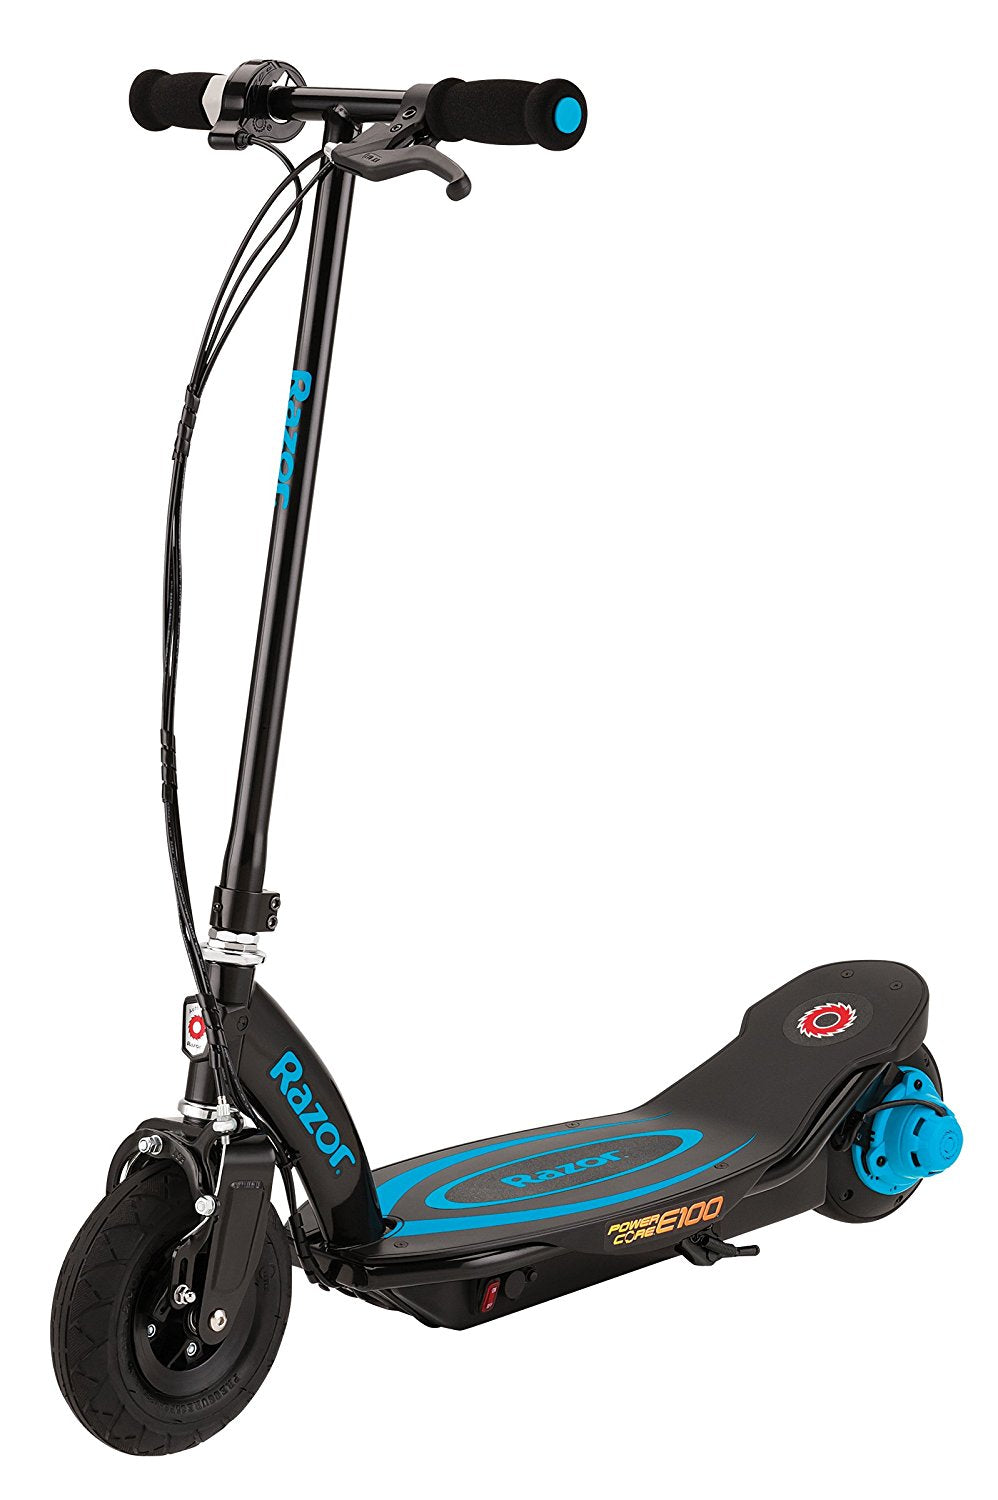 Razor Power Core E100 Electric Scooter, Blue - 12hrs Recharge time, Up to 60min Run time, 11mph, 120lb max. weight, recommended for 8yrs and up